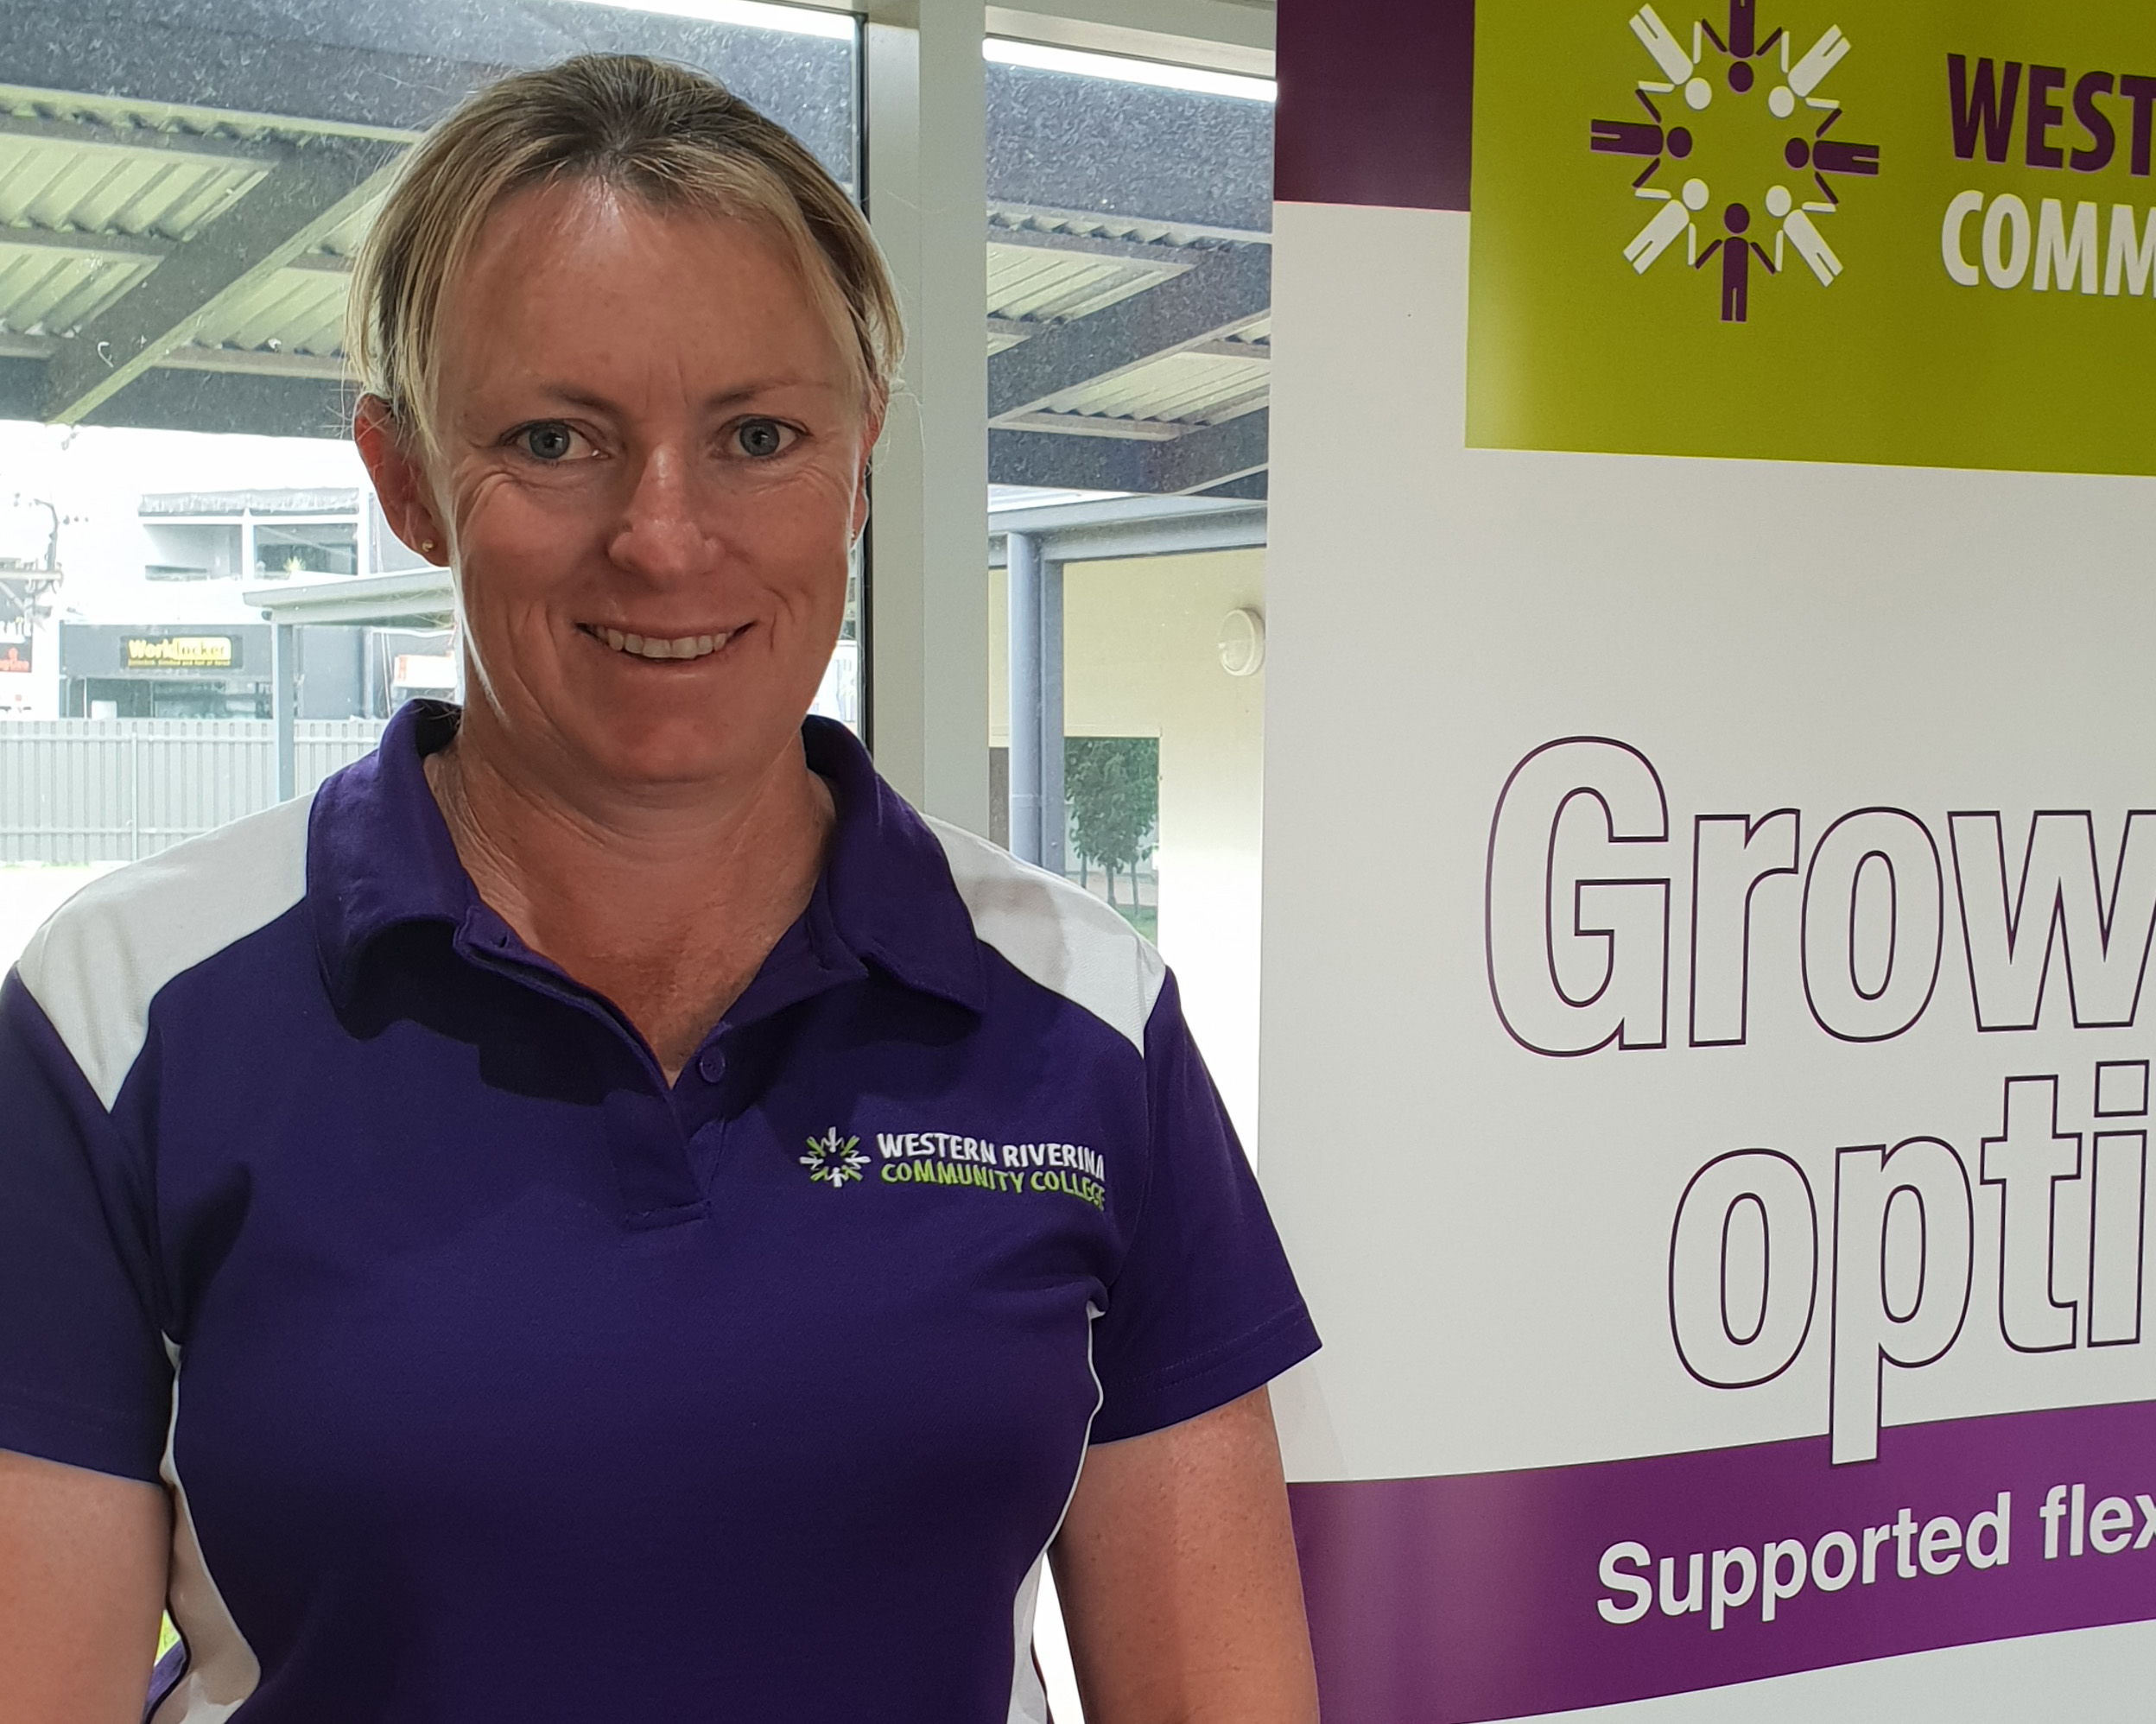 Natalie O'Leary, Leeton Campus Manager